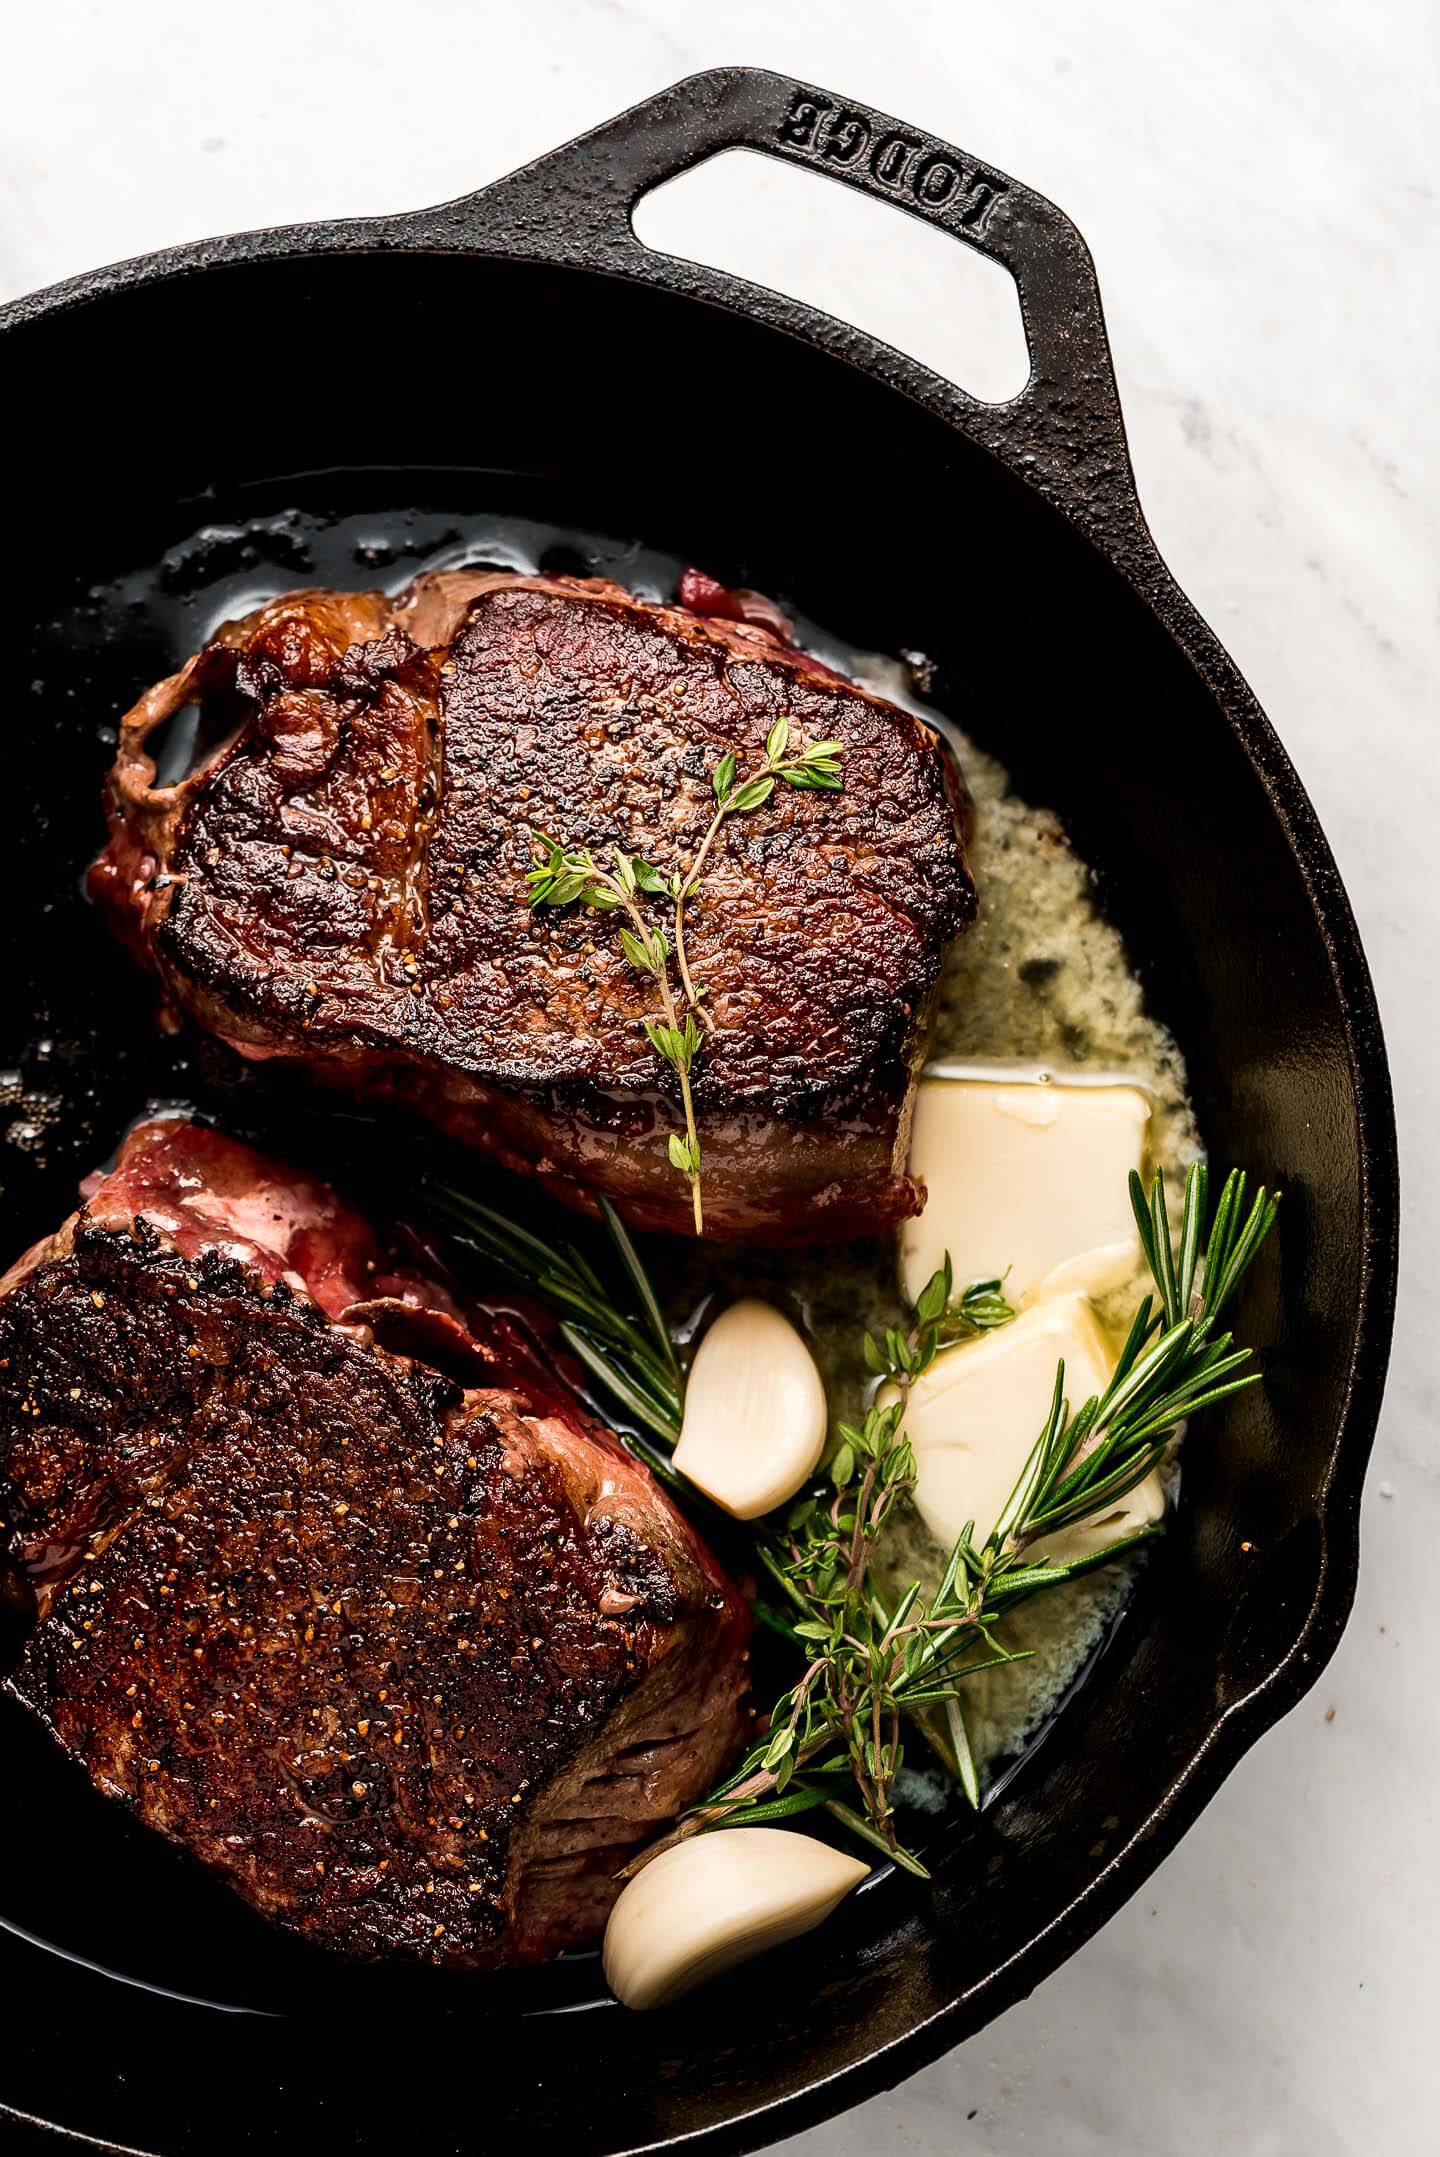 Two beef tenderloin steaks in a cast iron skillet with fresh herbs, butter, and garlic cloves.